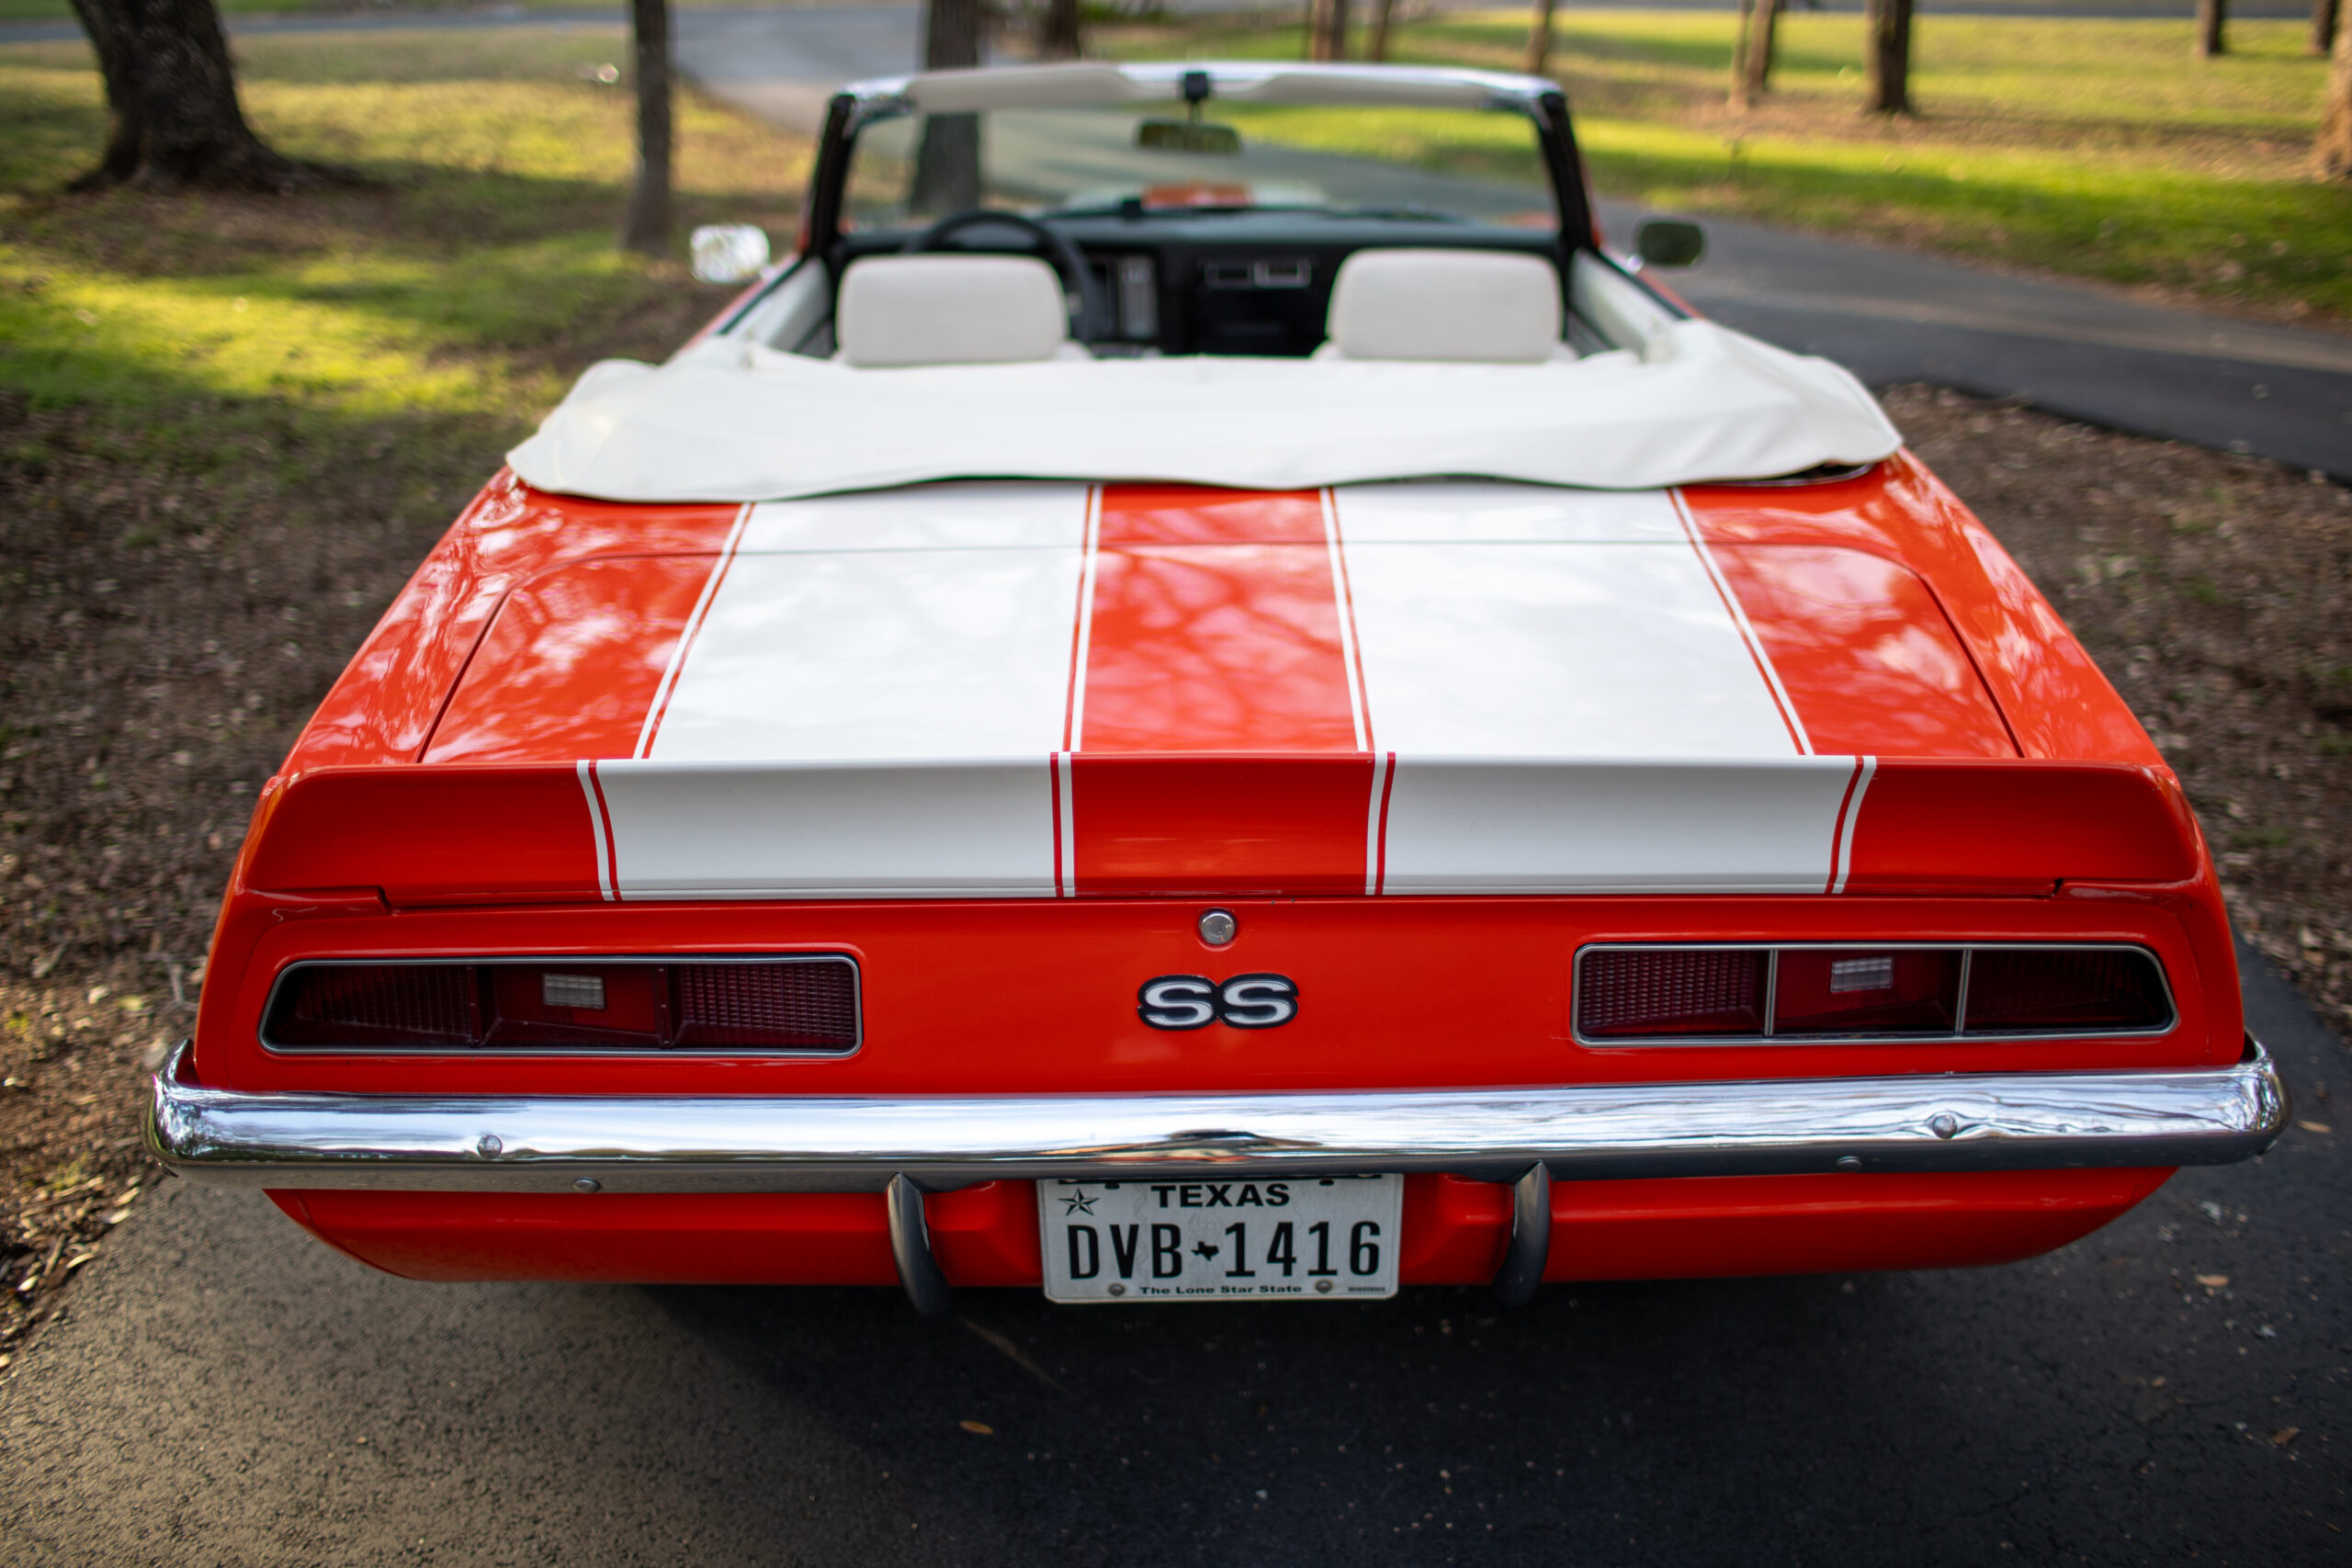 Rear view of a red and white convertible sports car with a Texas license plate "DVB-1416," parked on a driveway in a wooded area. The car has "SS" branding on the trunk.